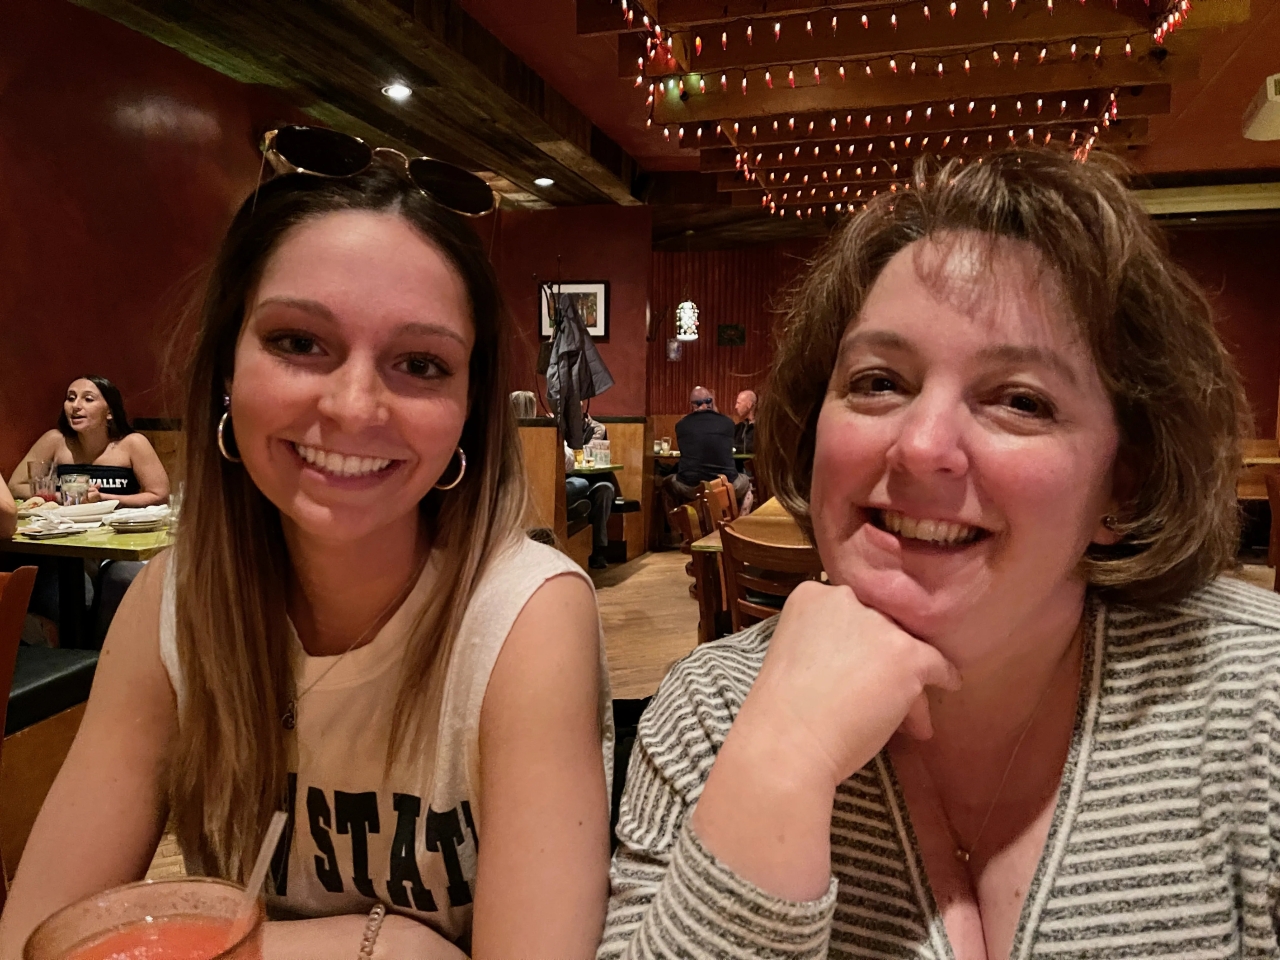 Scott's daughter and wife in a restaurant